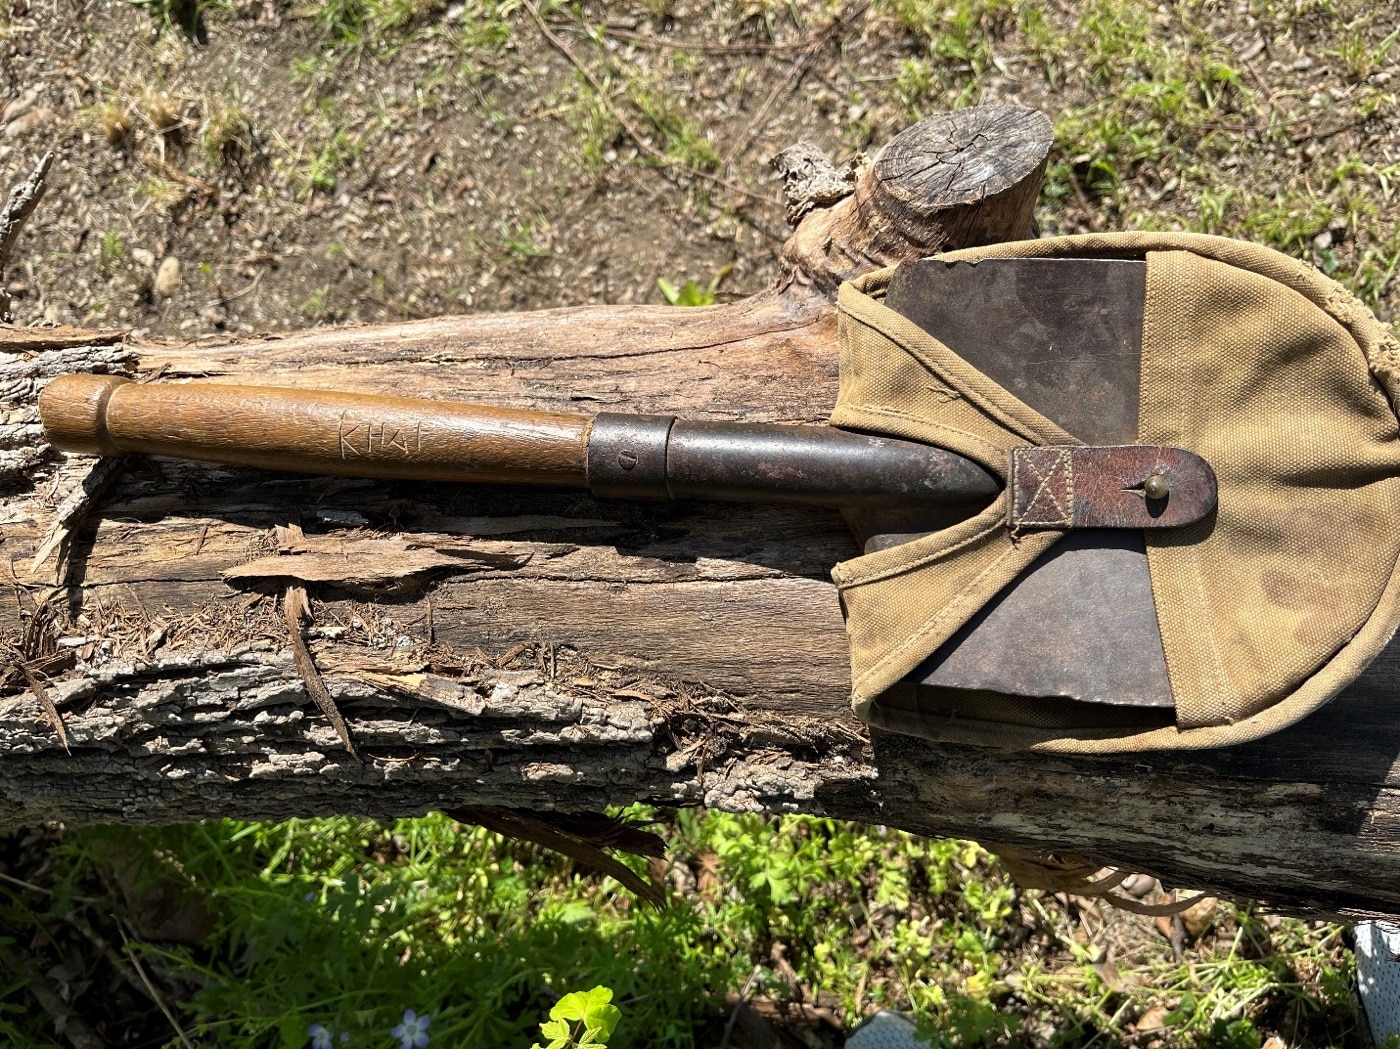 entrenching tool captured with the Type 53 carbine